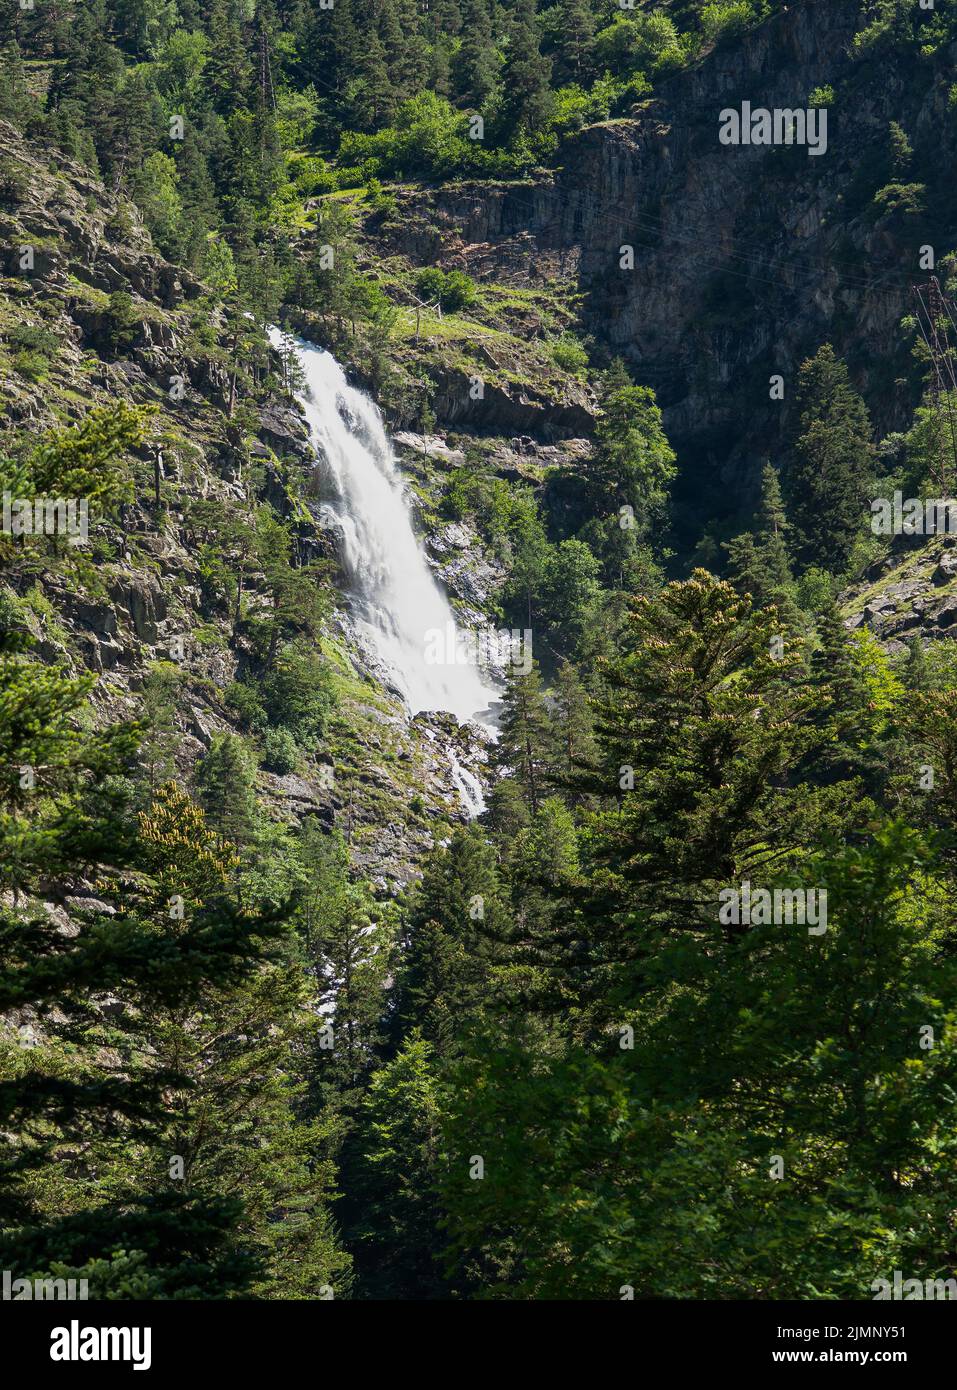 high mountain side waterfall amongst woodland and rock outcrops Stock Photo